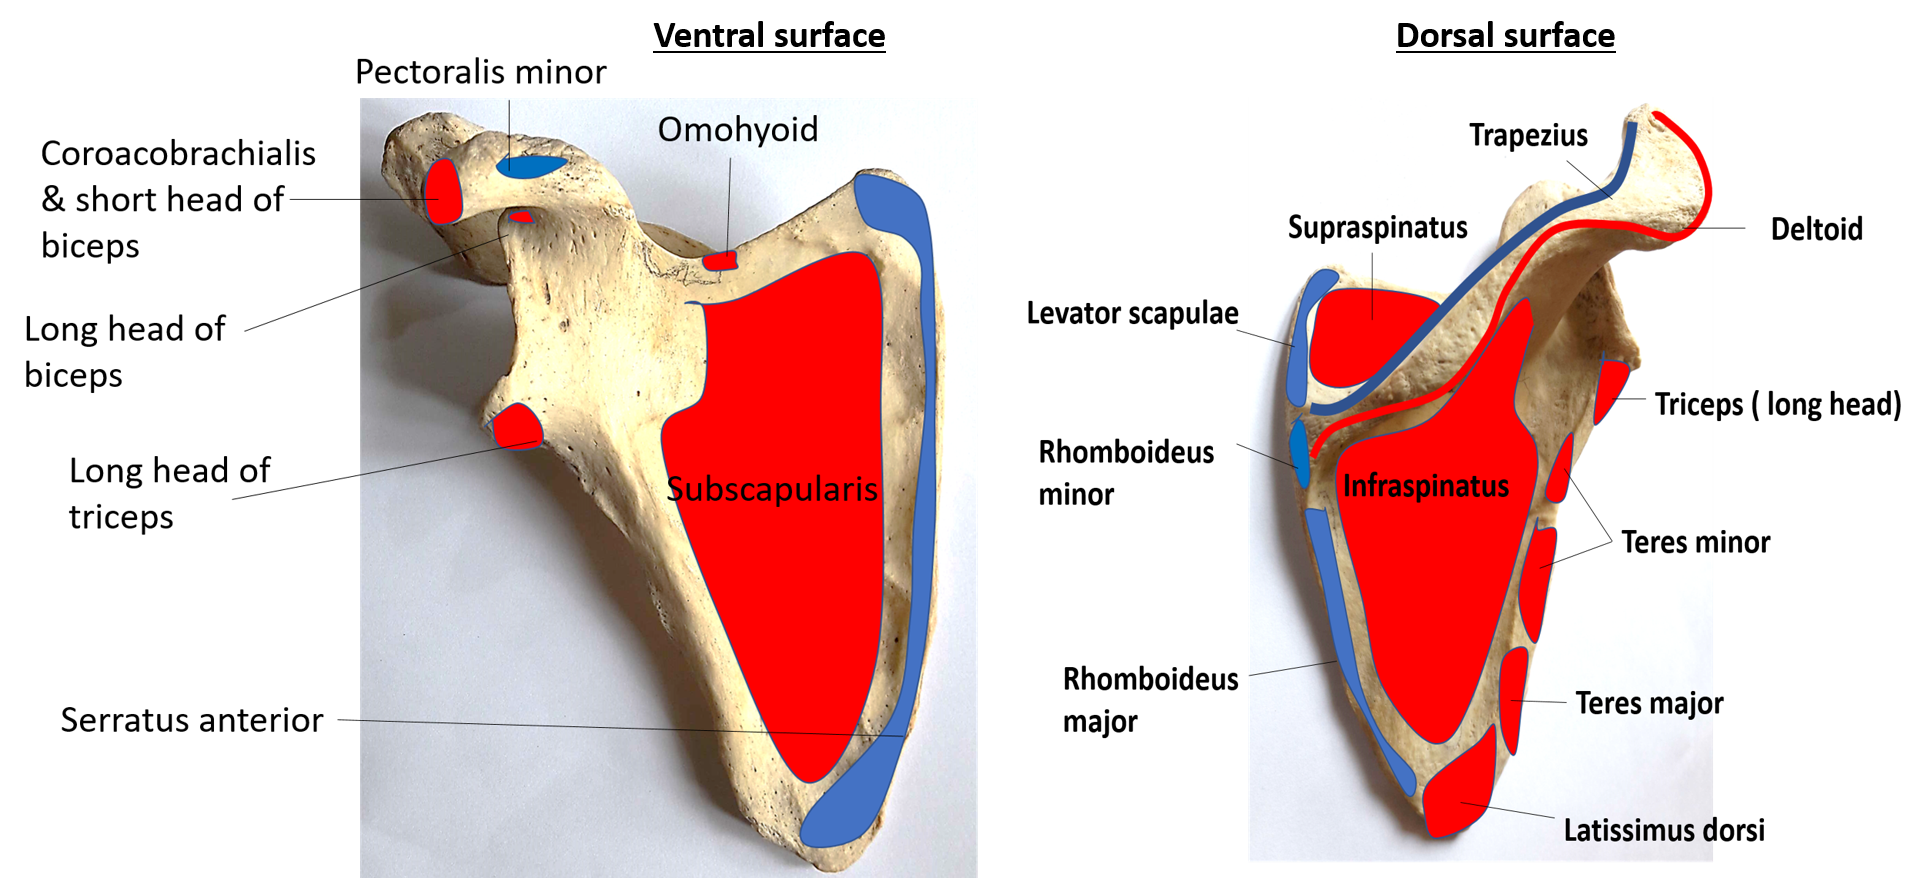 scapula -muscles attached